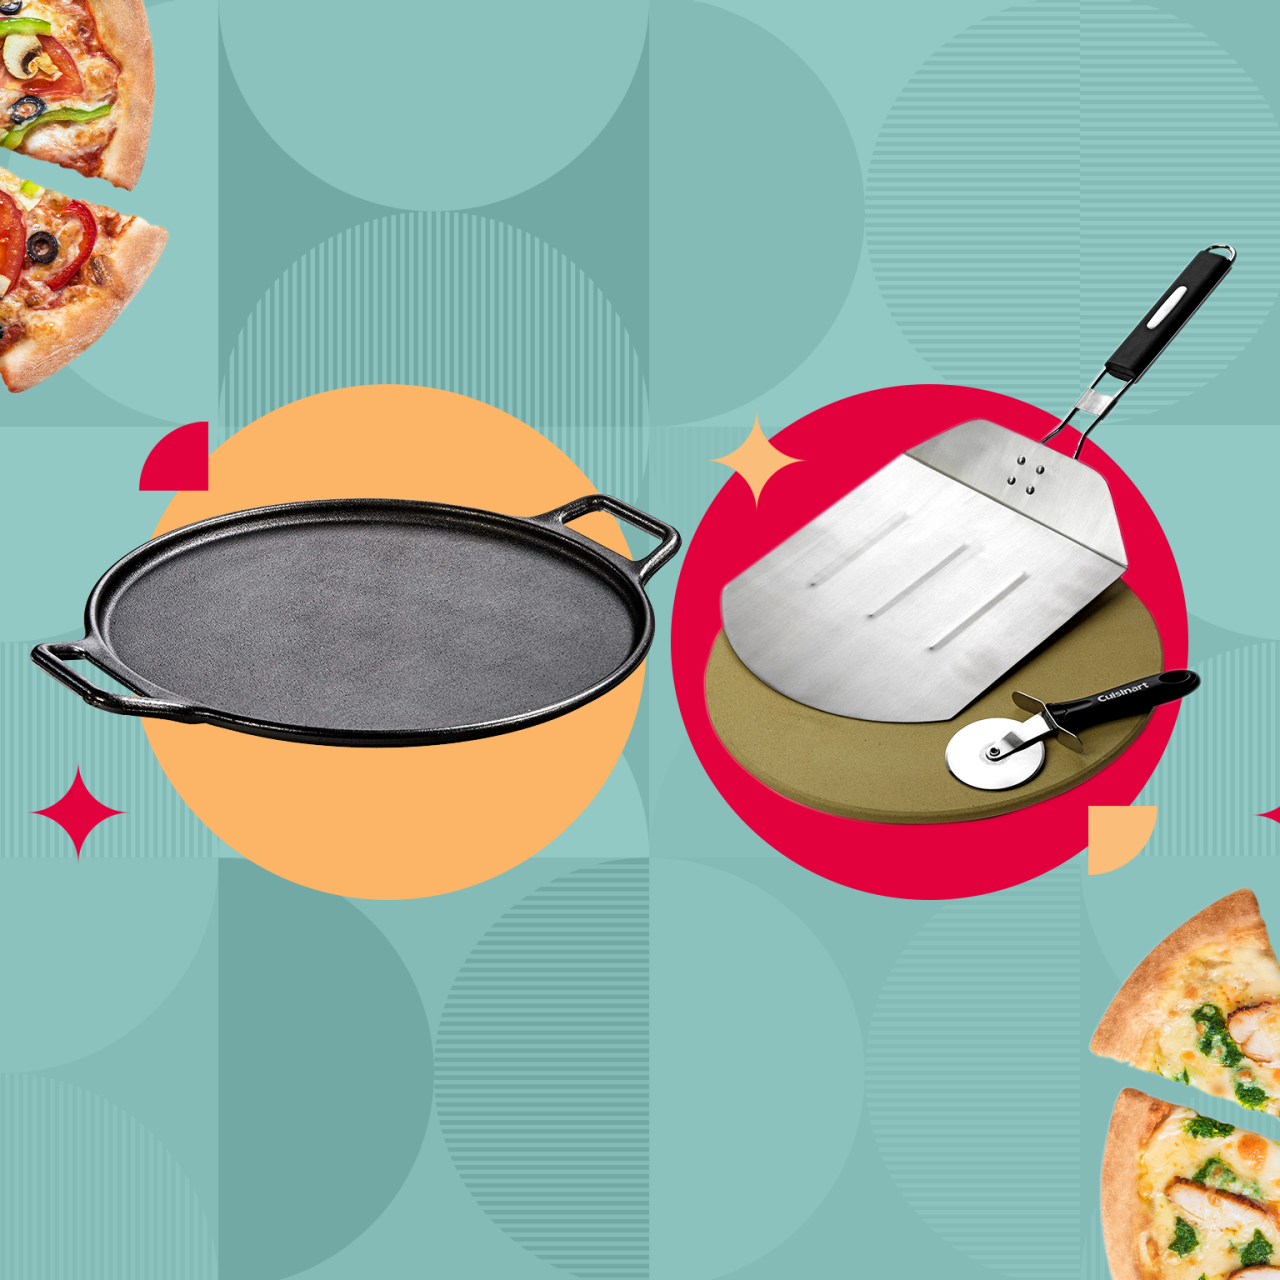 The Total Deluxe Pizza Accessory Kit